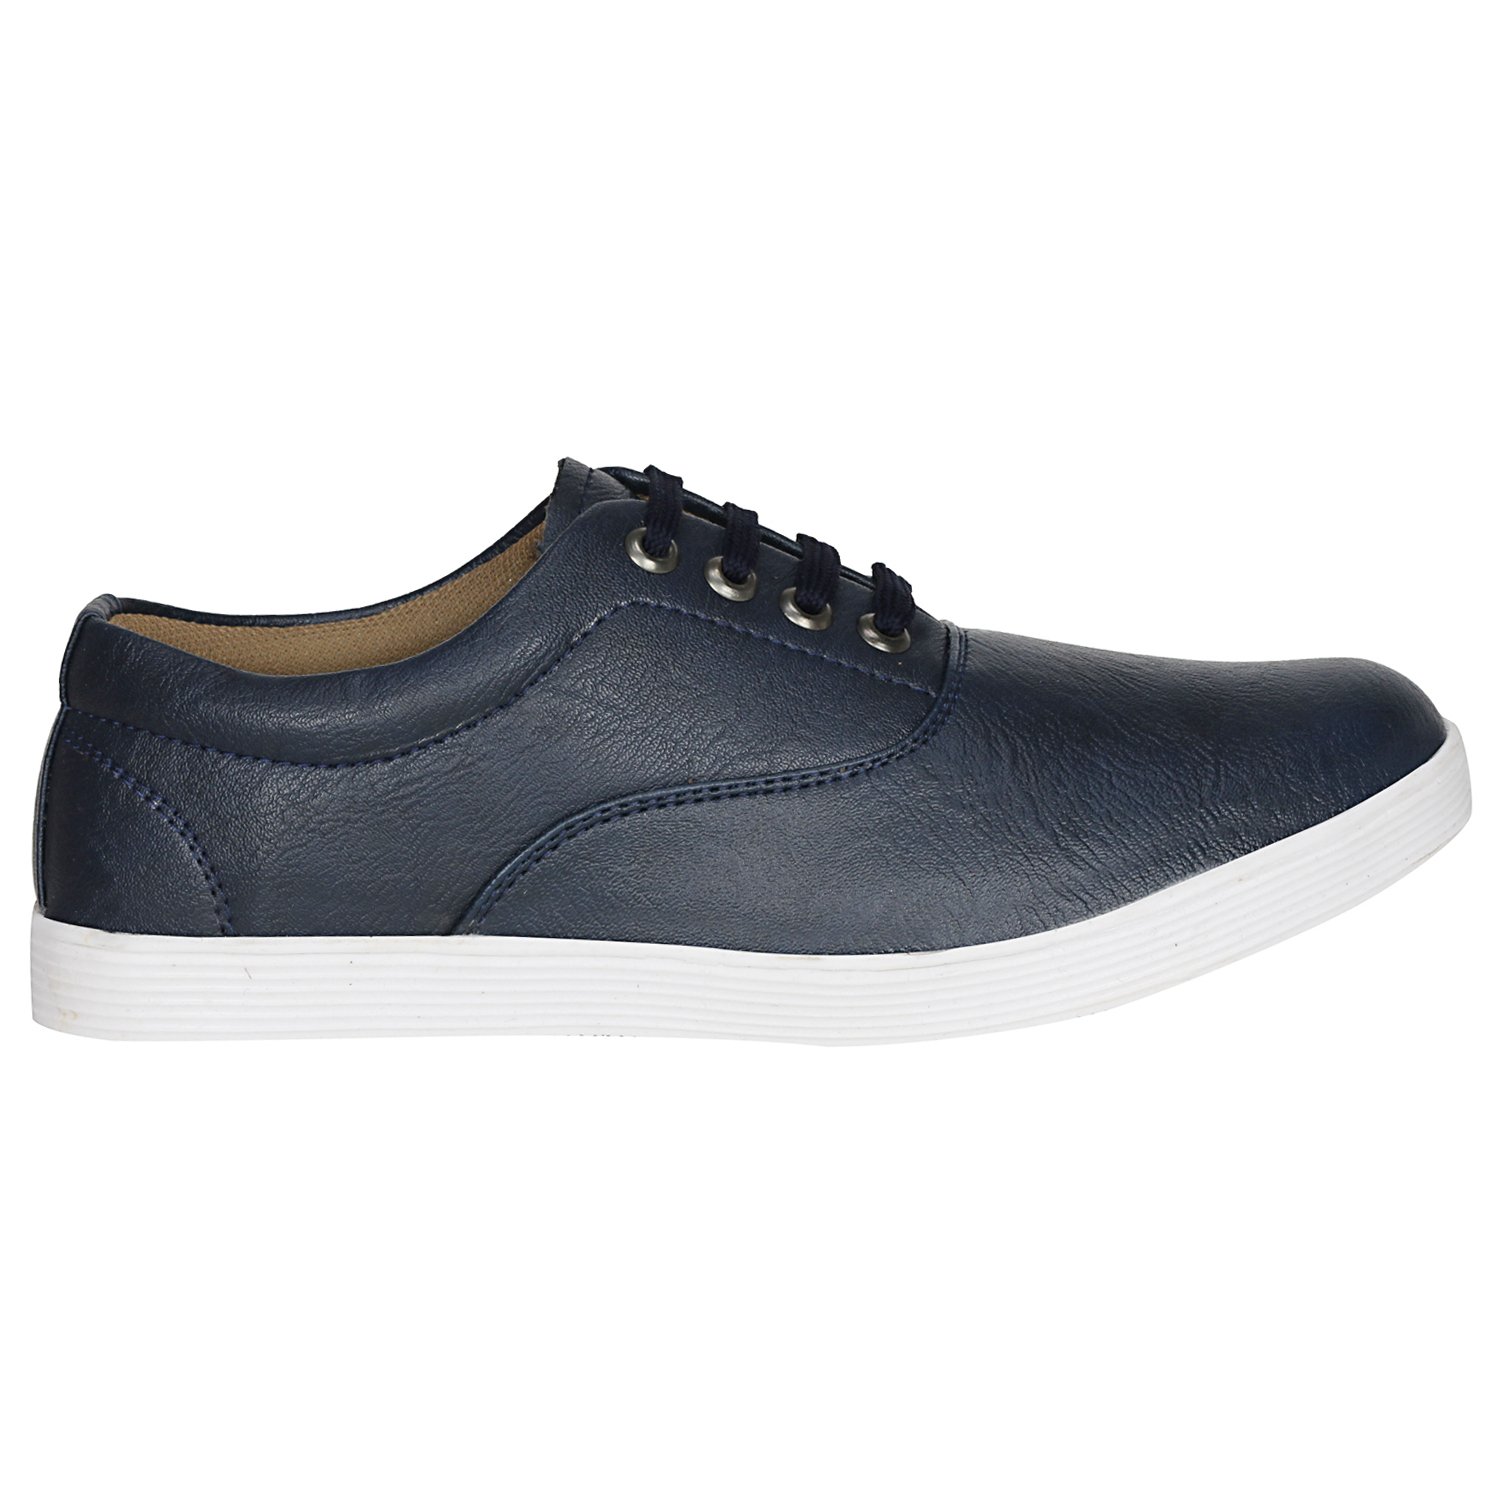 Knot n Lace Men’s Sneakers